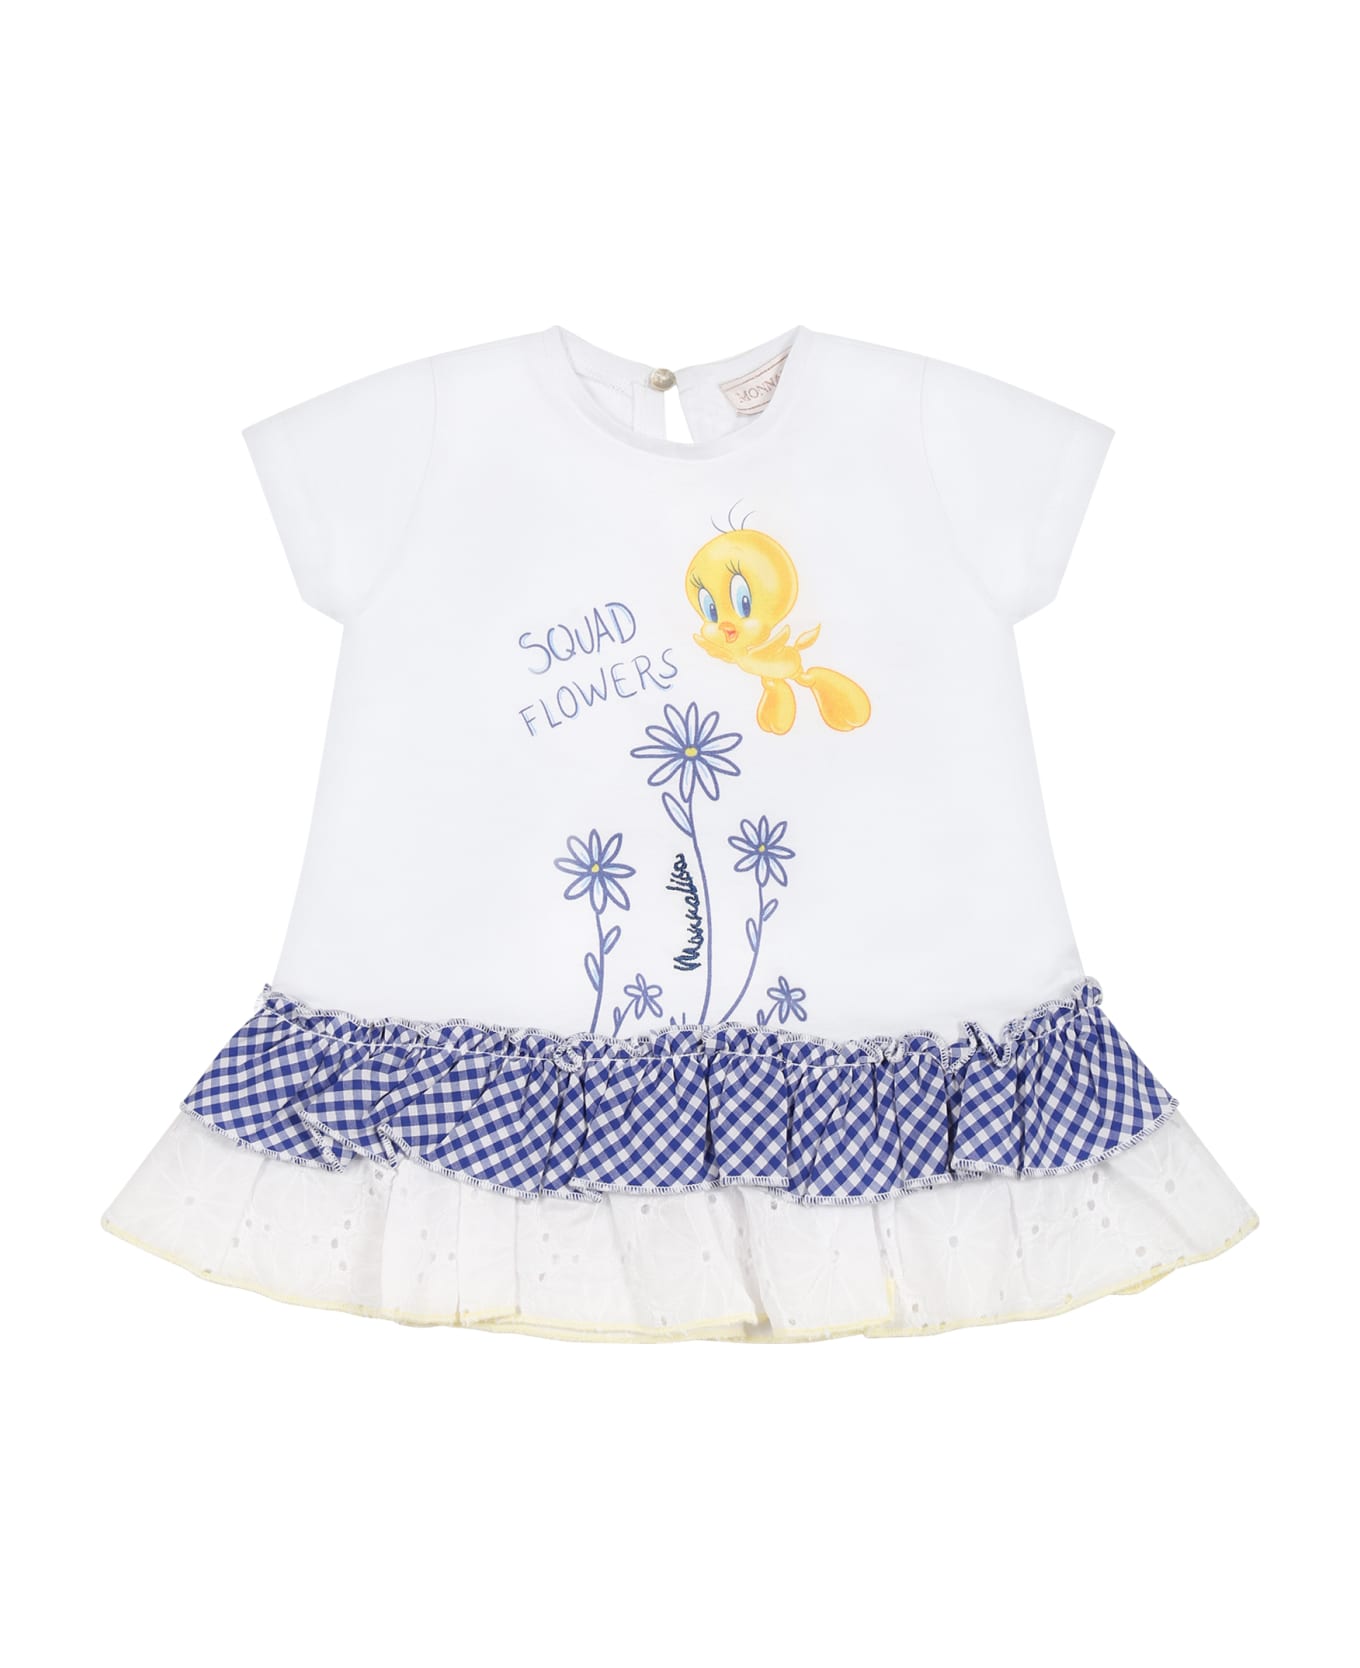 Monnalisa White T-shirt For Baby Girl With Tweety Print And Logo - White